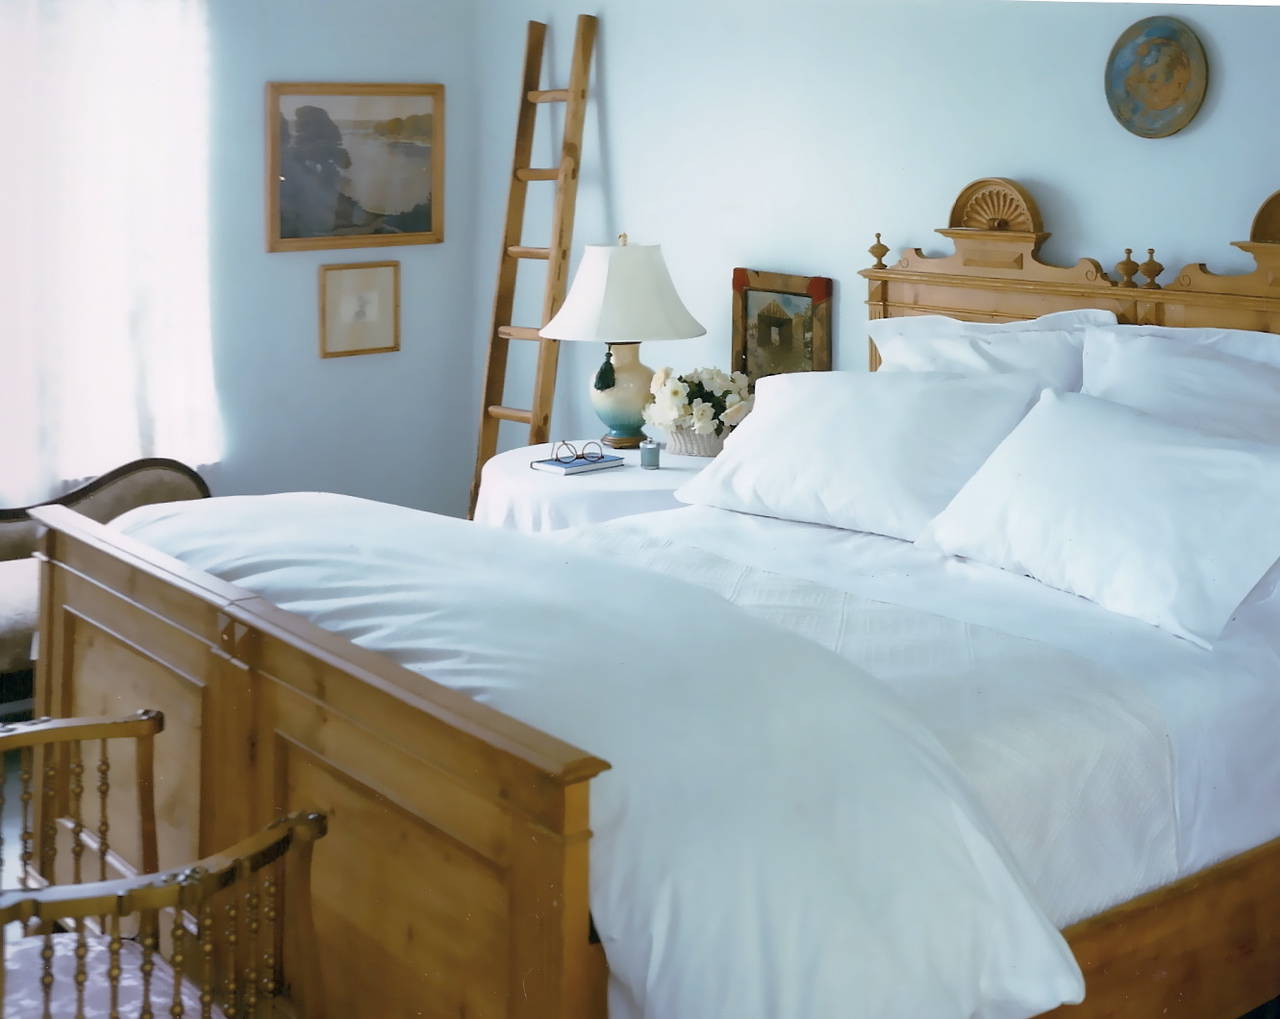 This classic bed was originally a European double (i.e., two 30